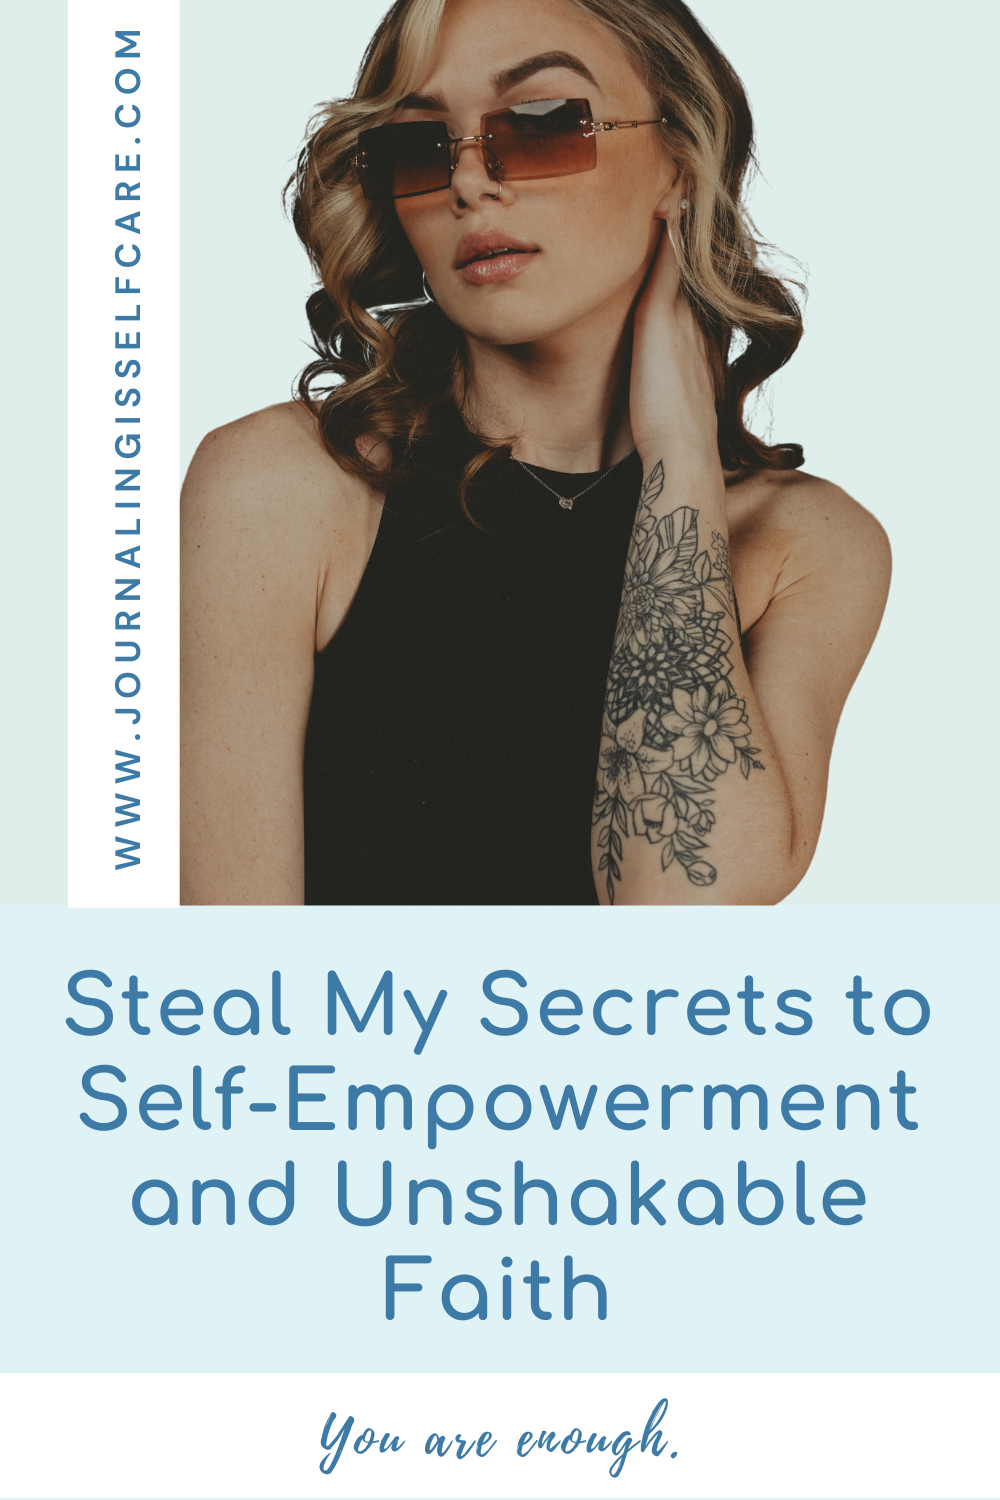 Steal My Secrets to Self-Empowerment and Unshakable Faith